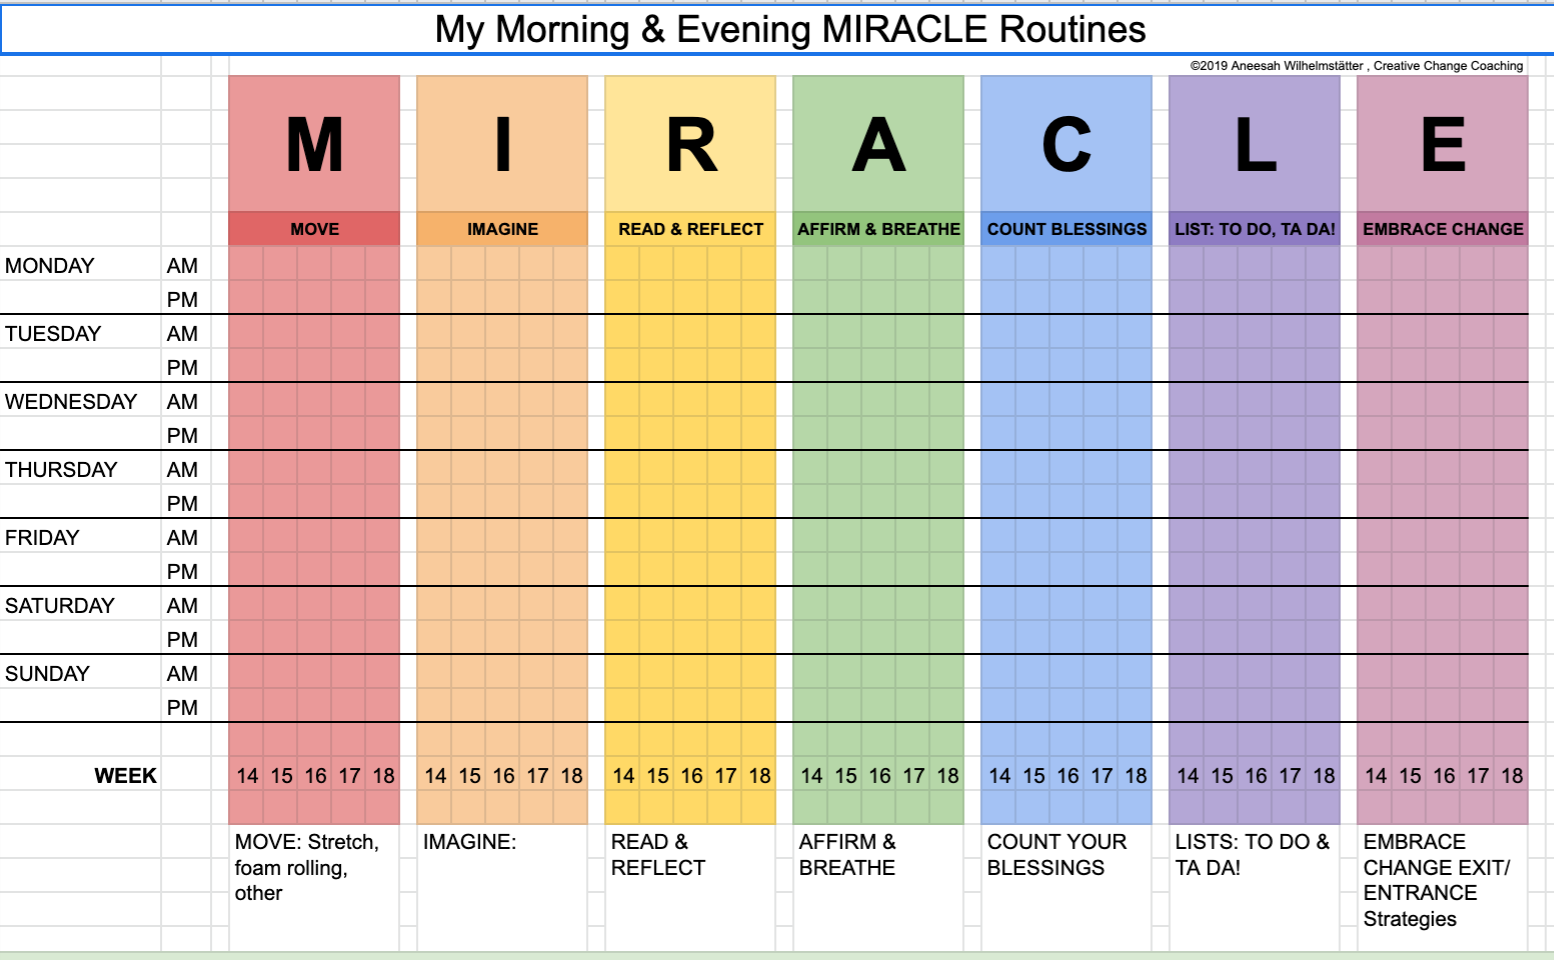 Morning and Evening MIRACLE habits!